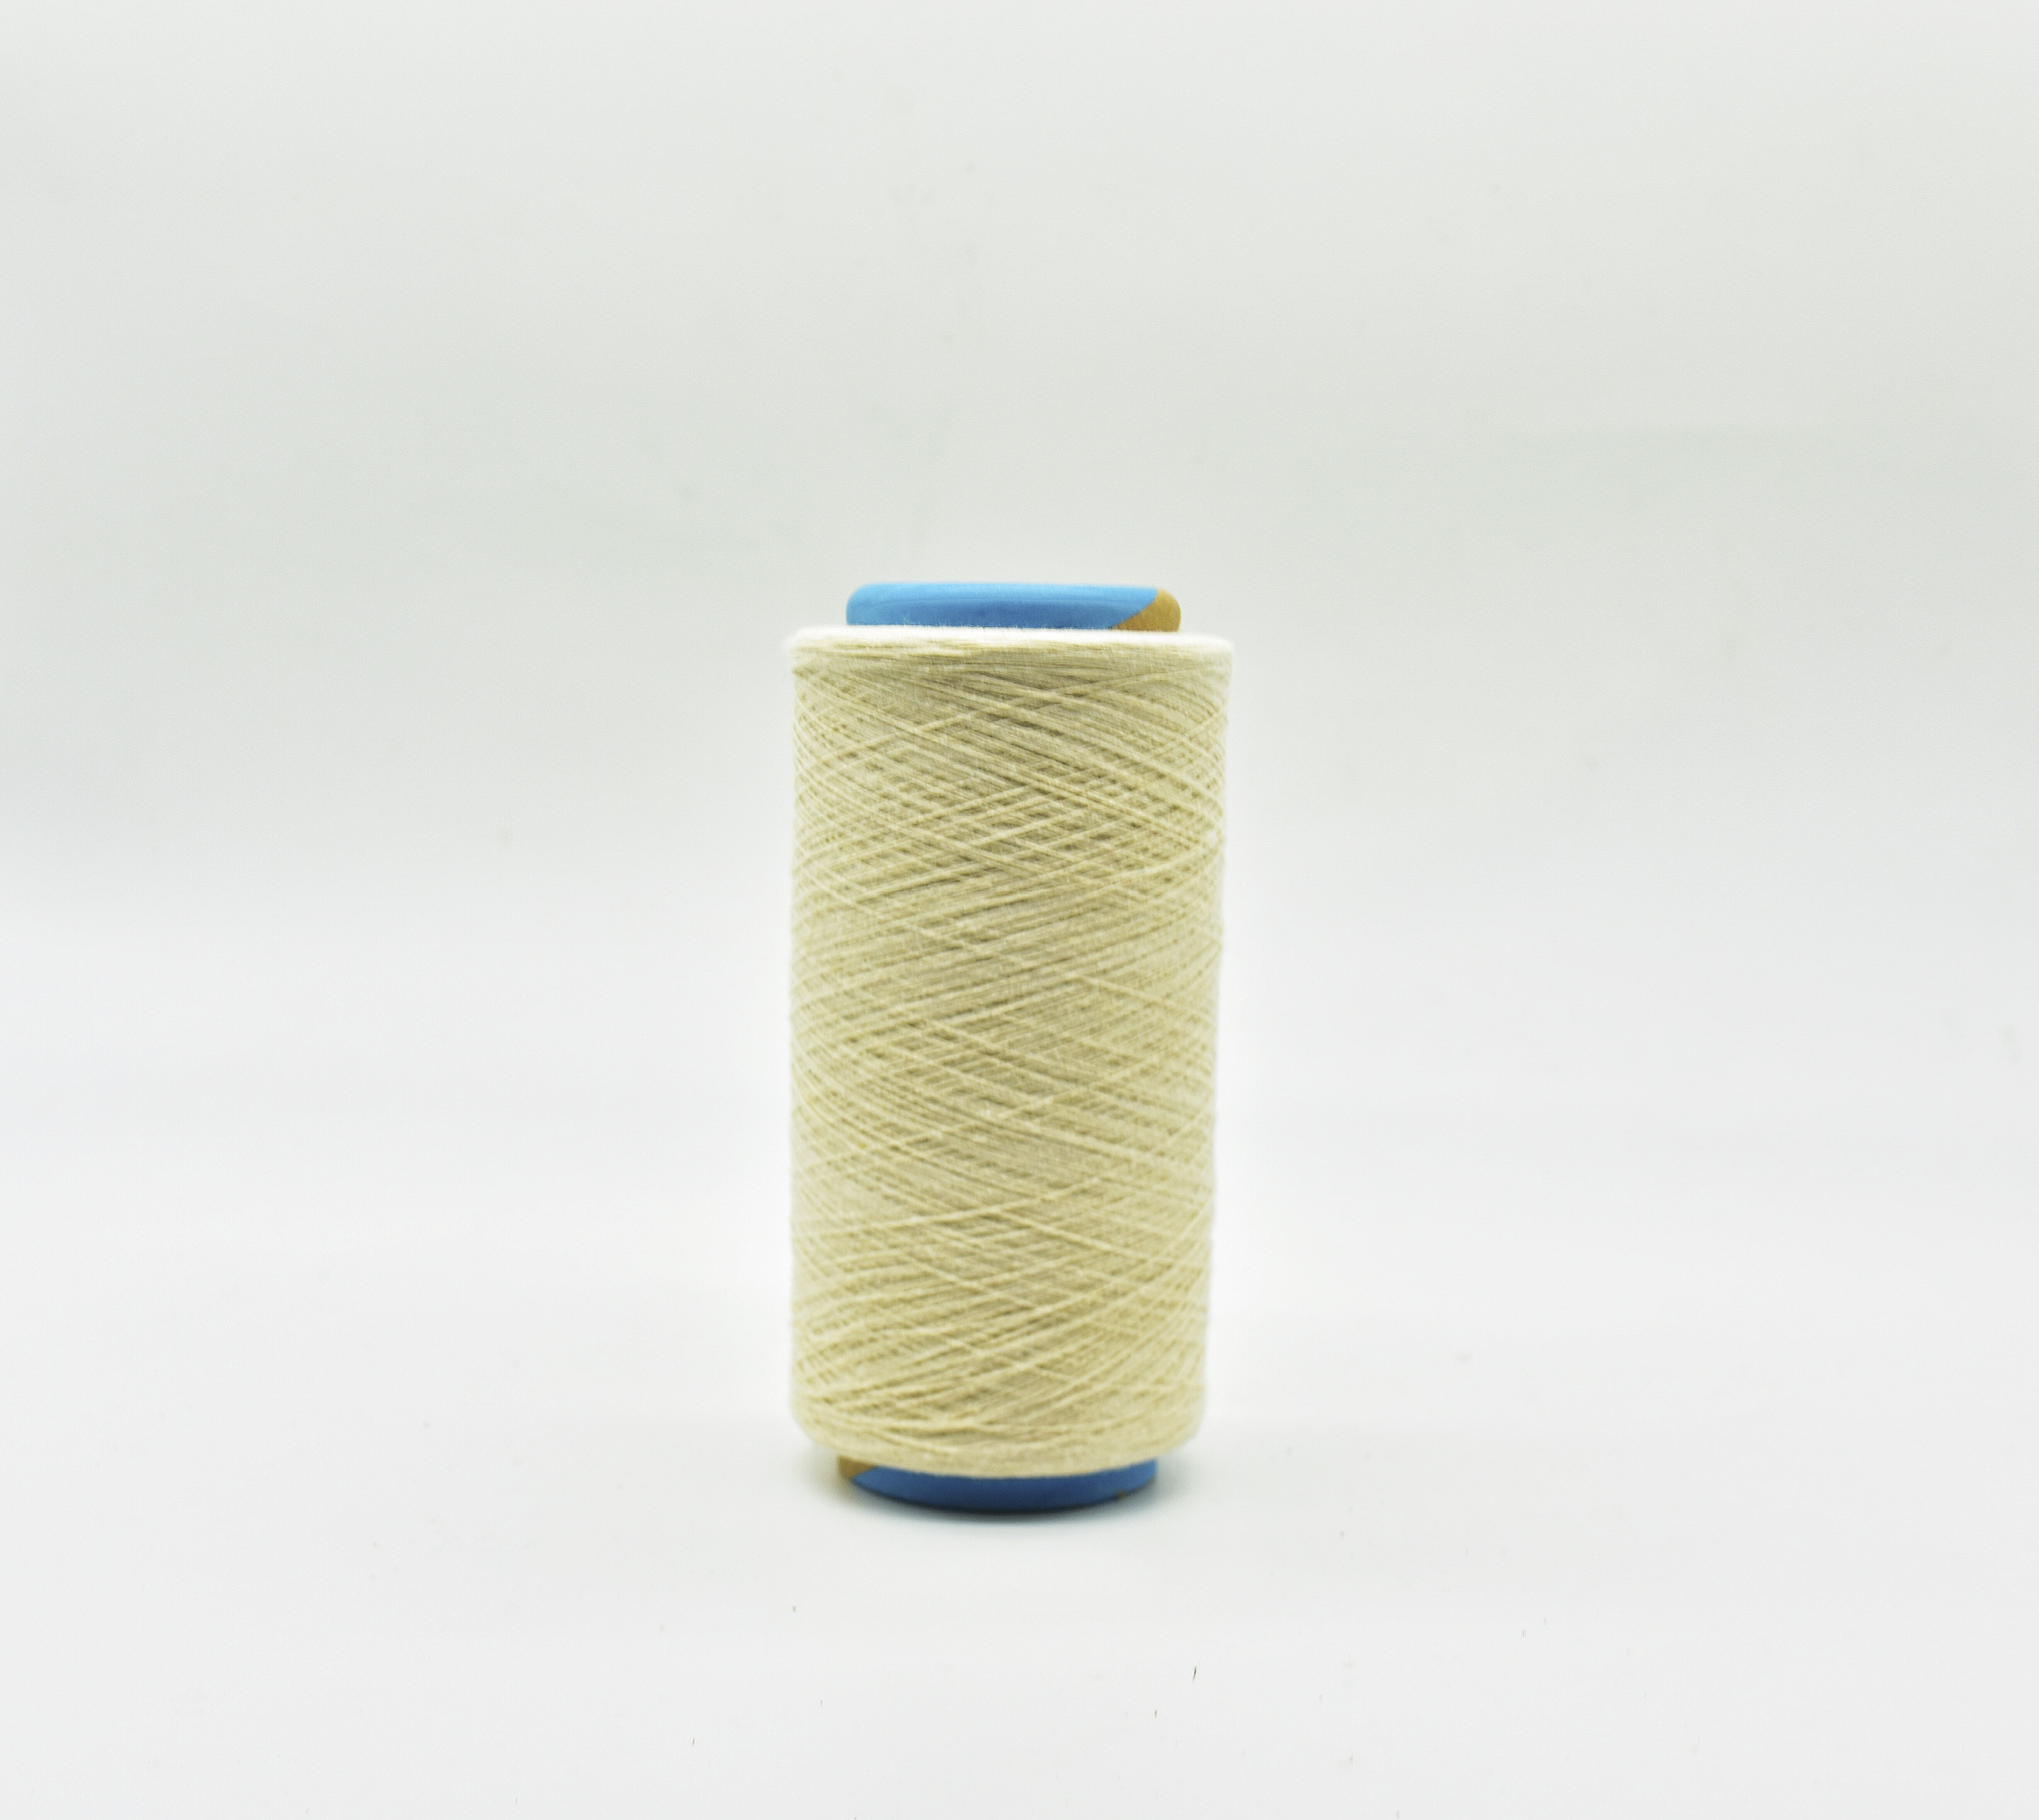 NE 16sS raw white recycled cotton polyester yarn for weaving 